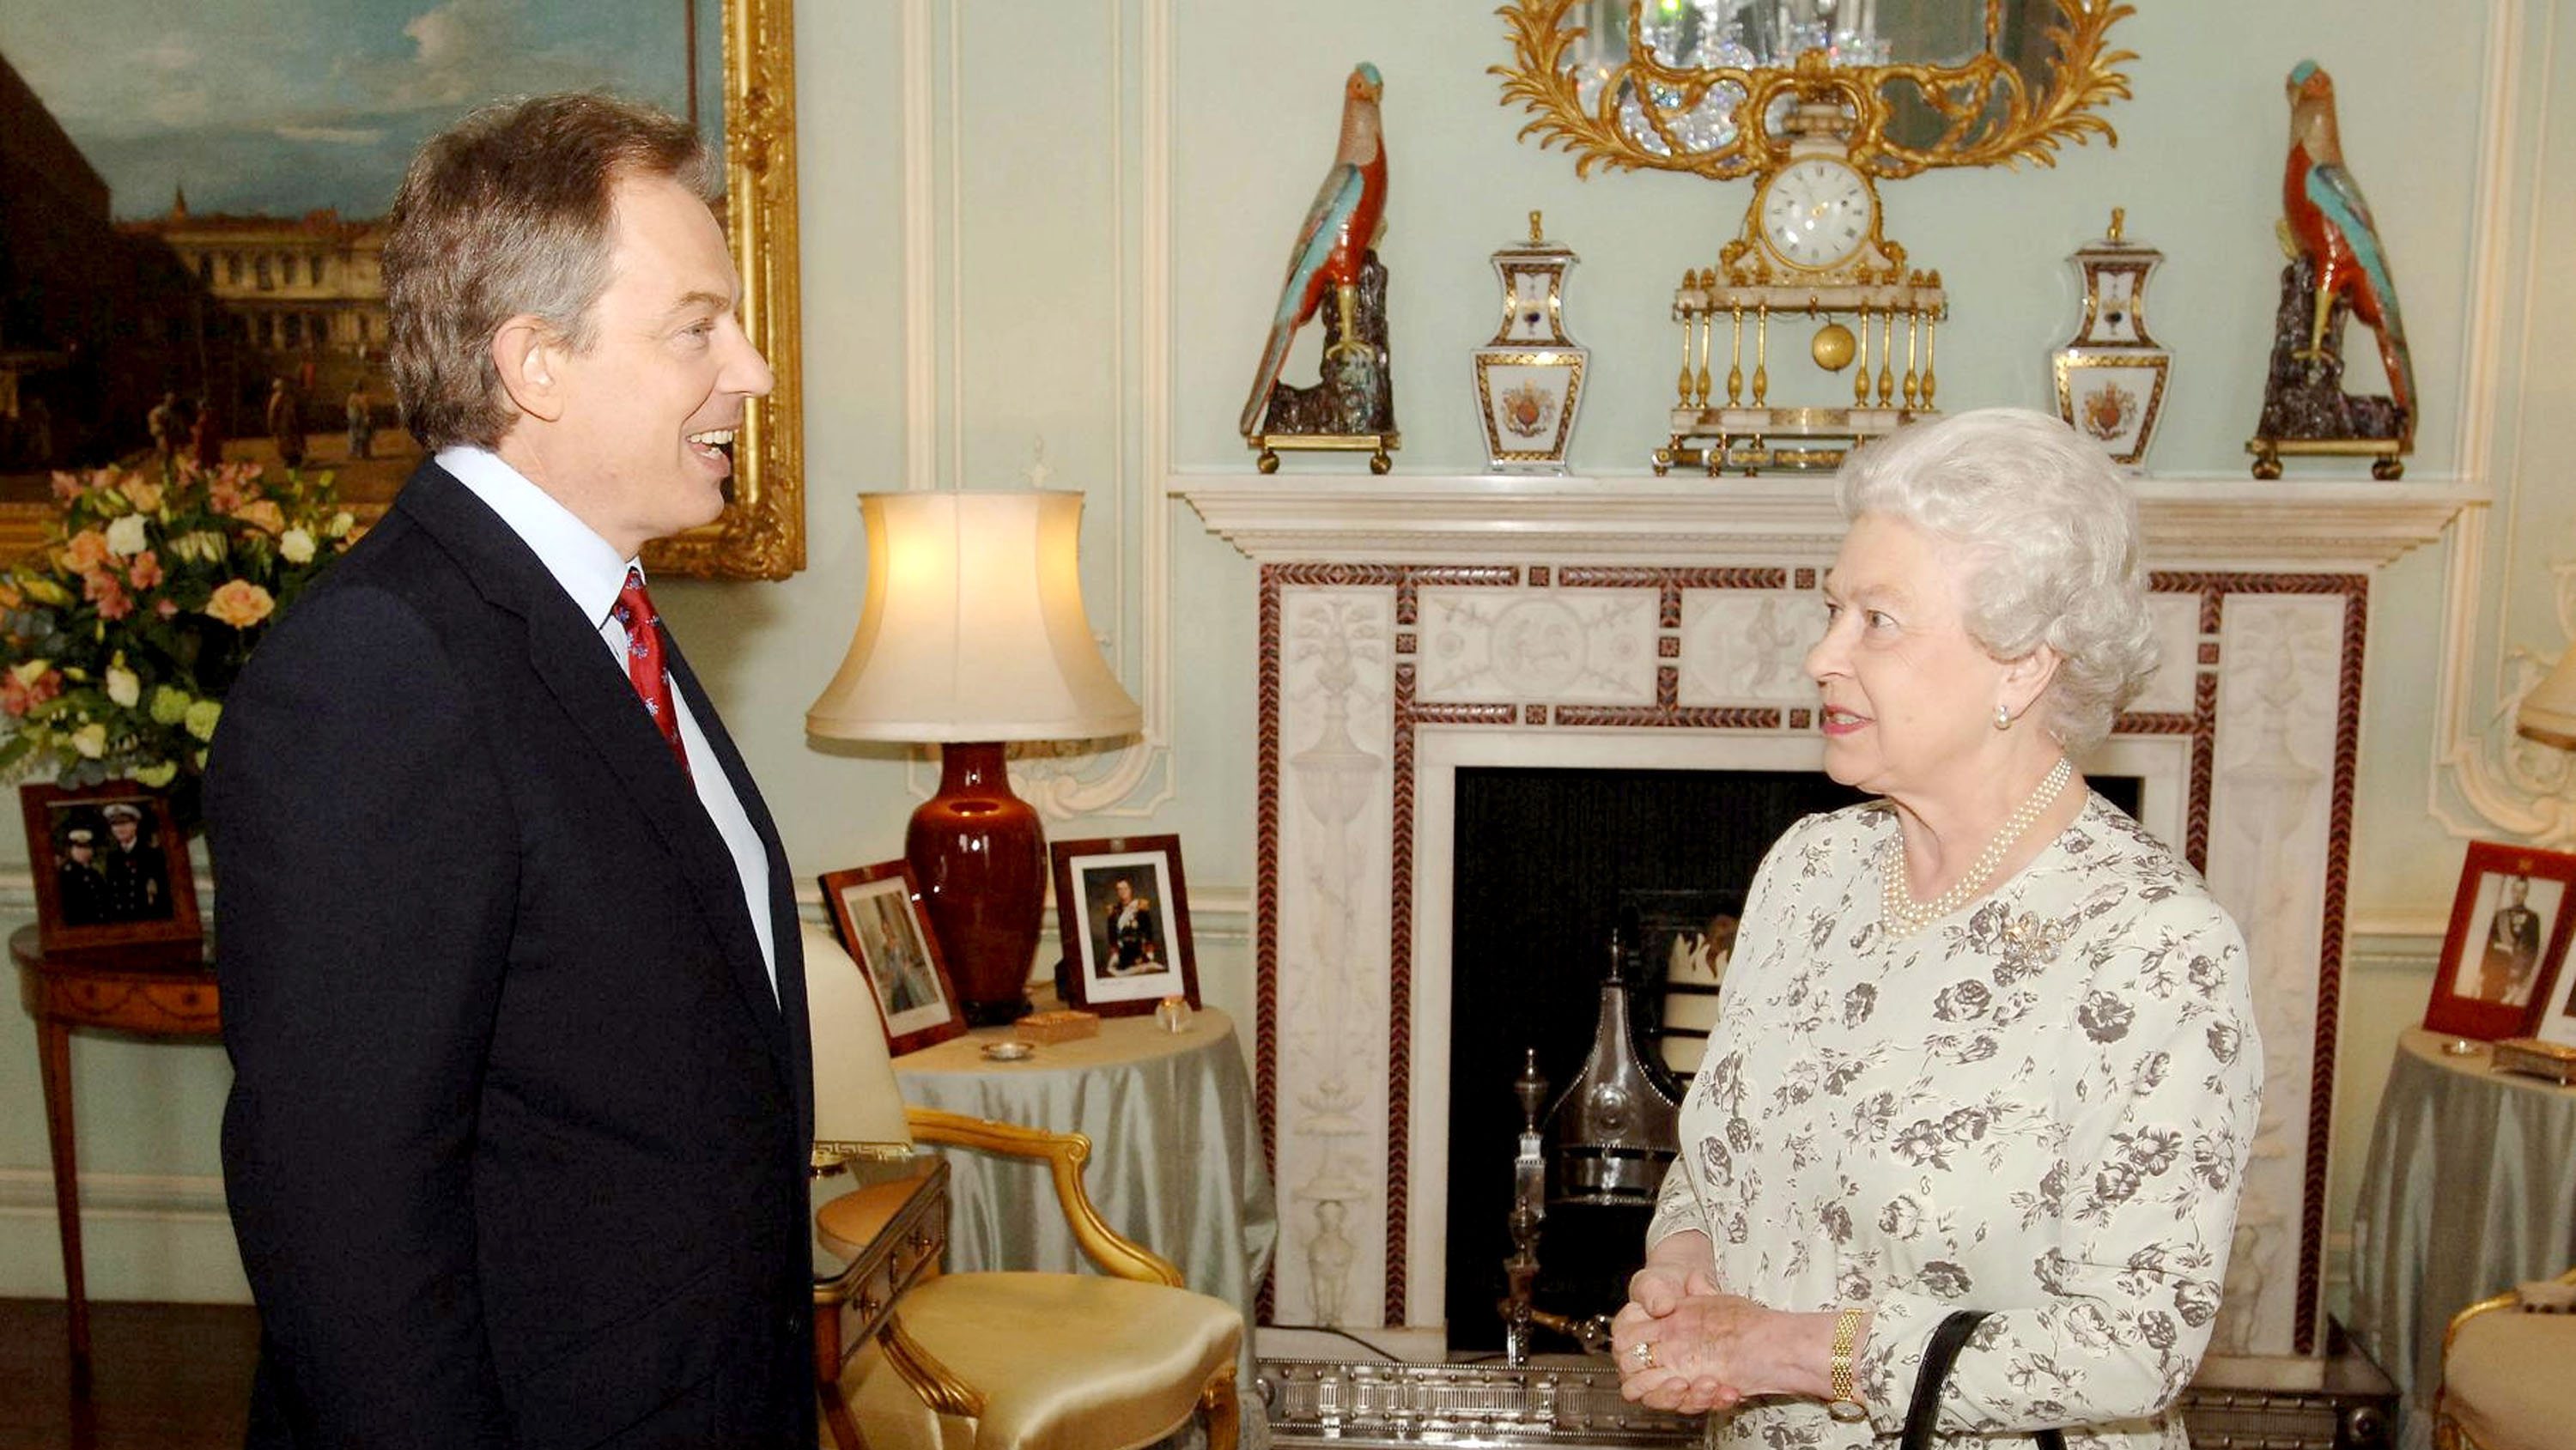 HM The Queen Elizabeth II Congratulates Tony Blair on Winning a Third Term in Government